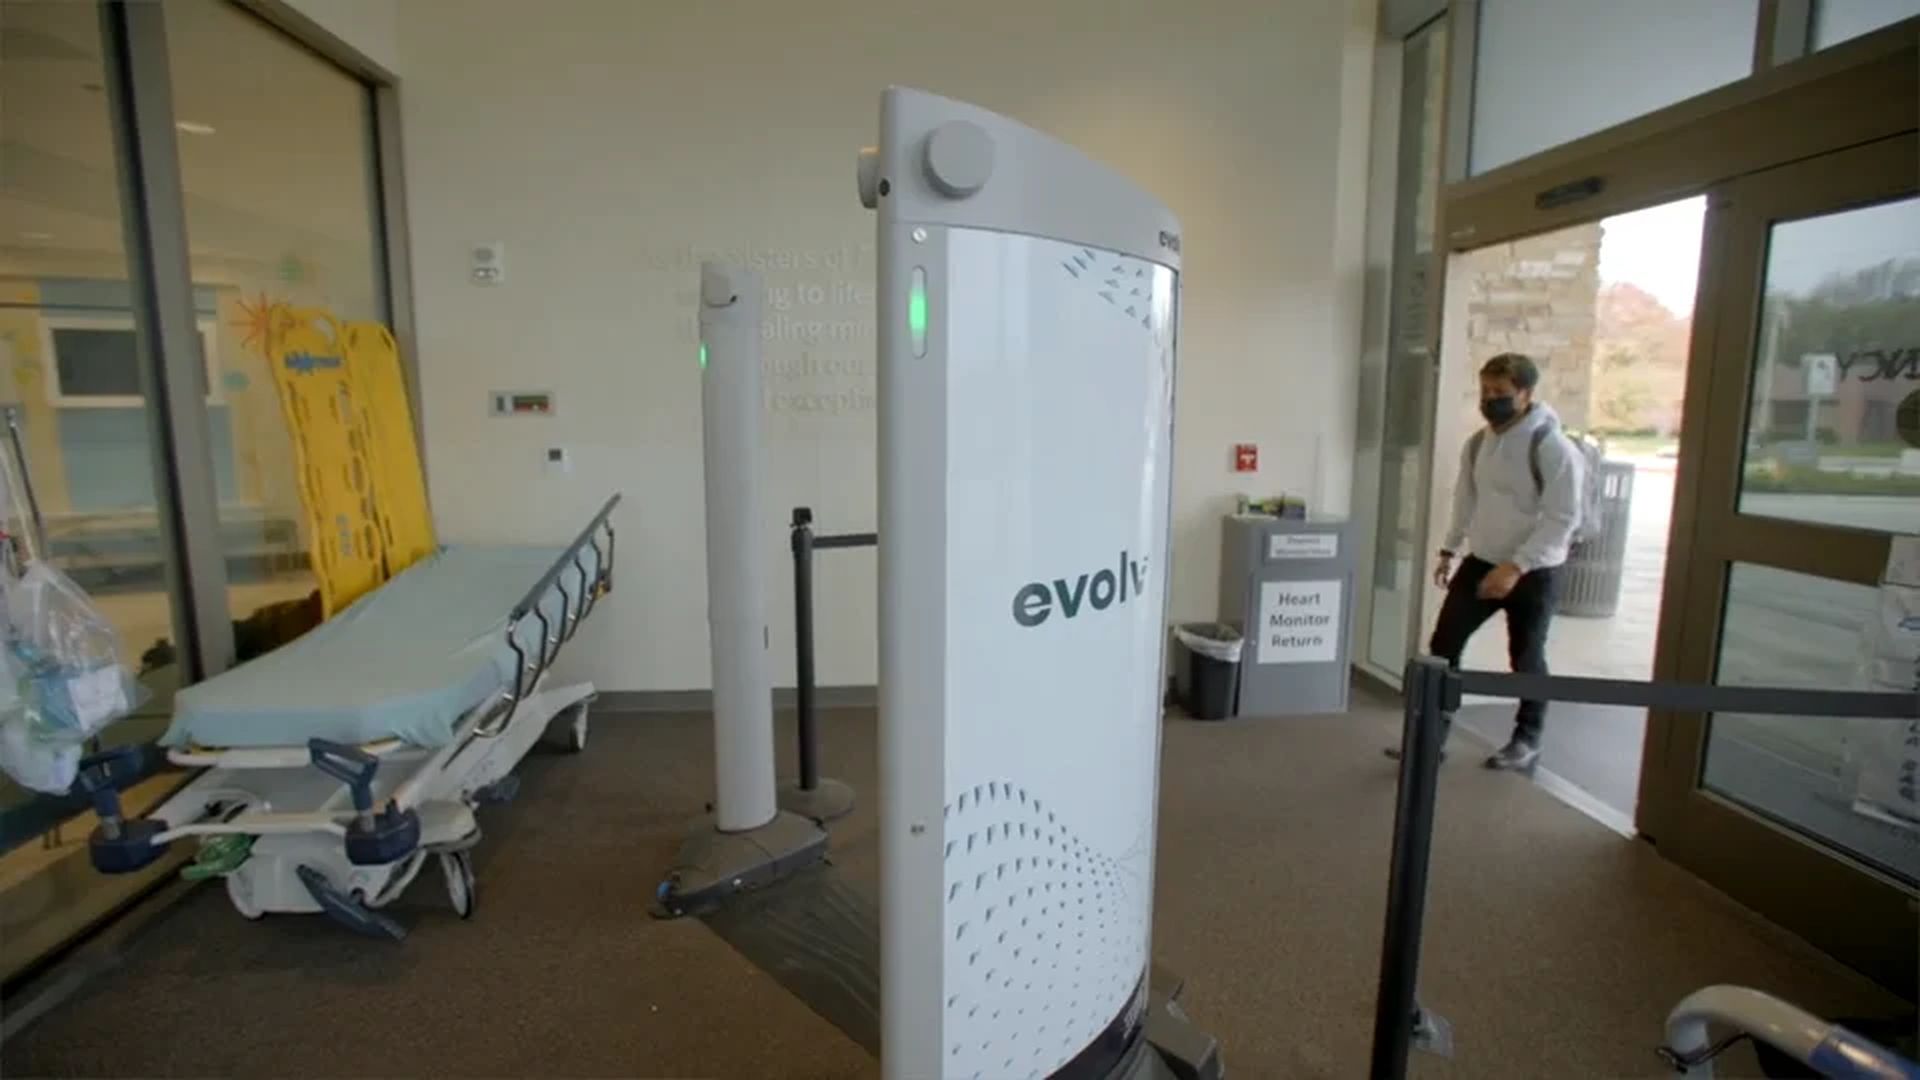 Evolv scanners in question: The truth behind UK testing AI weapon scanners